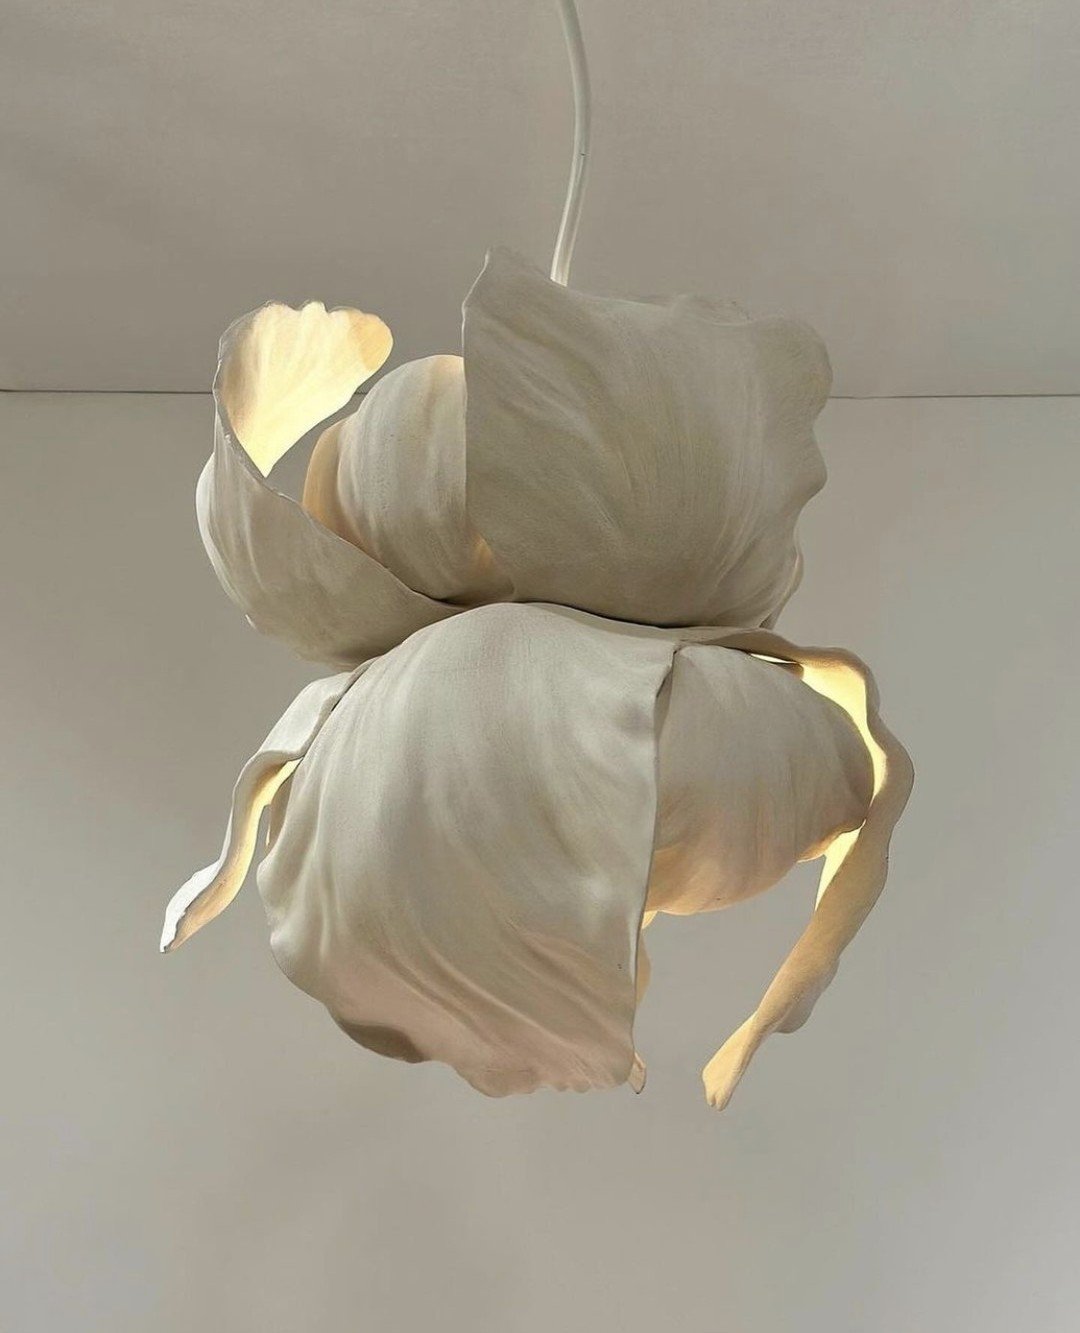 Embracing the artistry of illumination! ✨⁠
⁠
J'adore this stunning Guernica pendant light by Lighting Designer @mathieulehanneur &ndash; a radiant bloom inspired by the delicate iris flower, handcrafted from elegant ceramic. ⁠
⁠
We're captivated by t